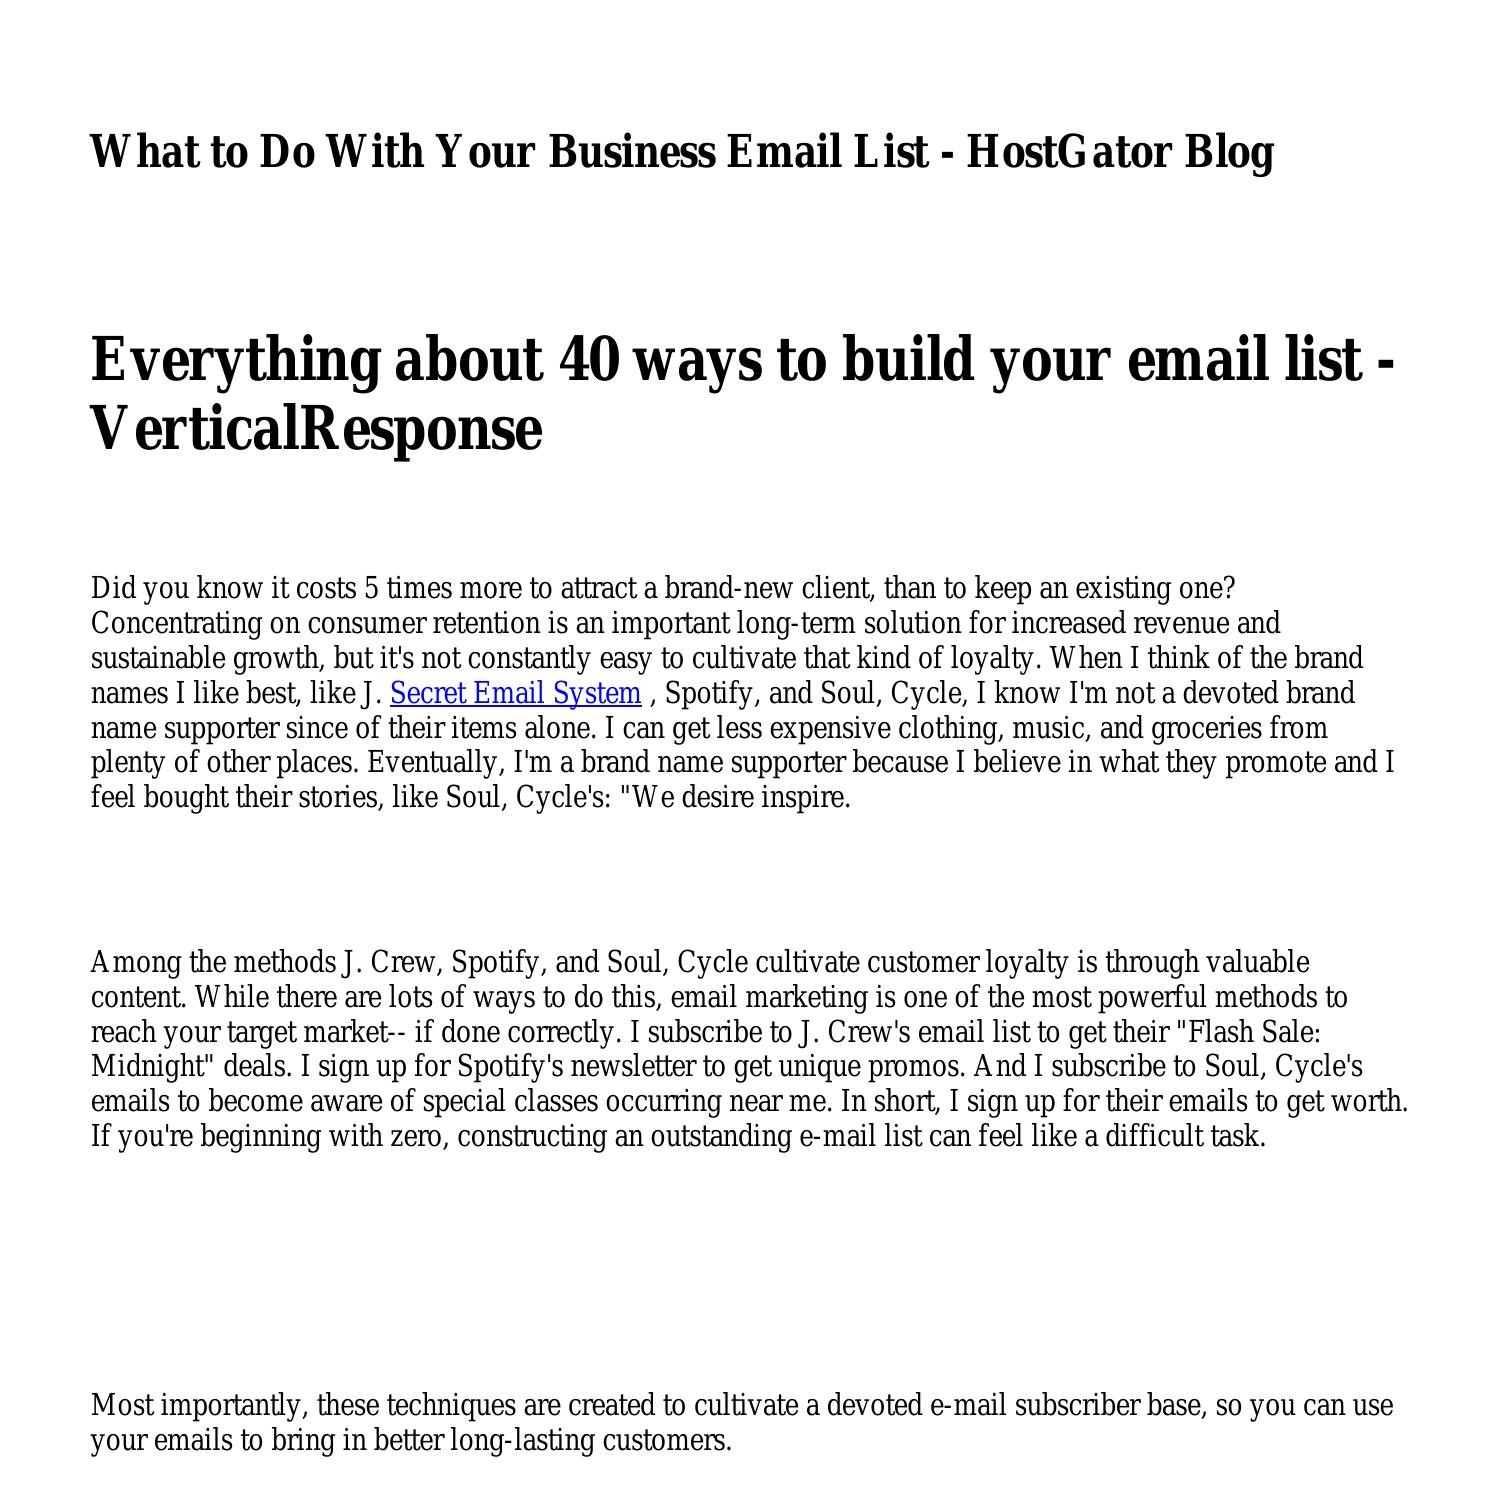 how-to-collect-emails-15-proven-ways-to-grow-your-email-listemihwmgnfm